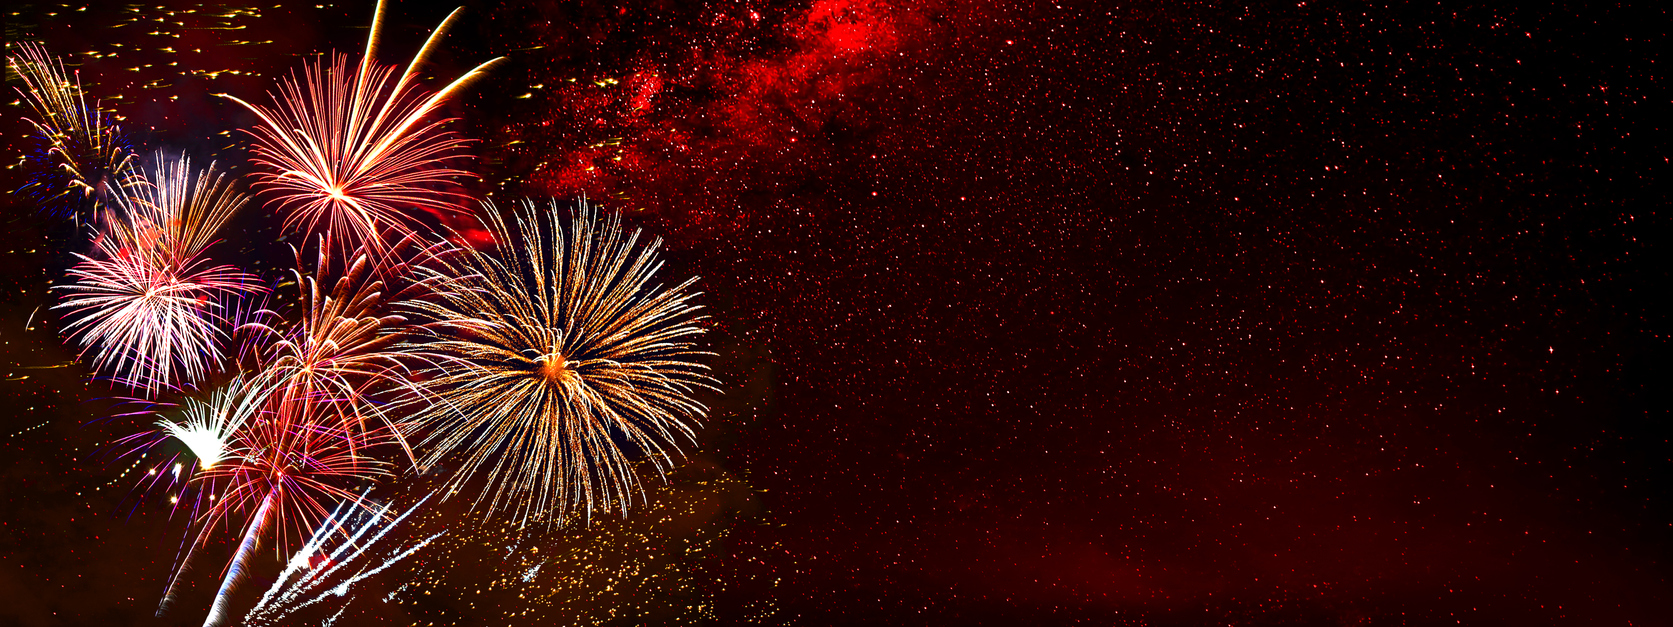 Fireworks background for anniversary, new year and festivals - CLOSLER -  CLOSLER